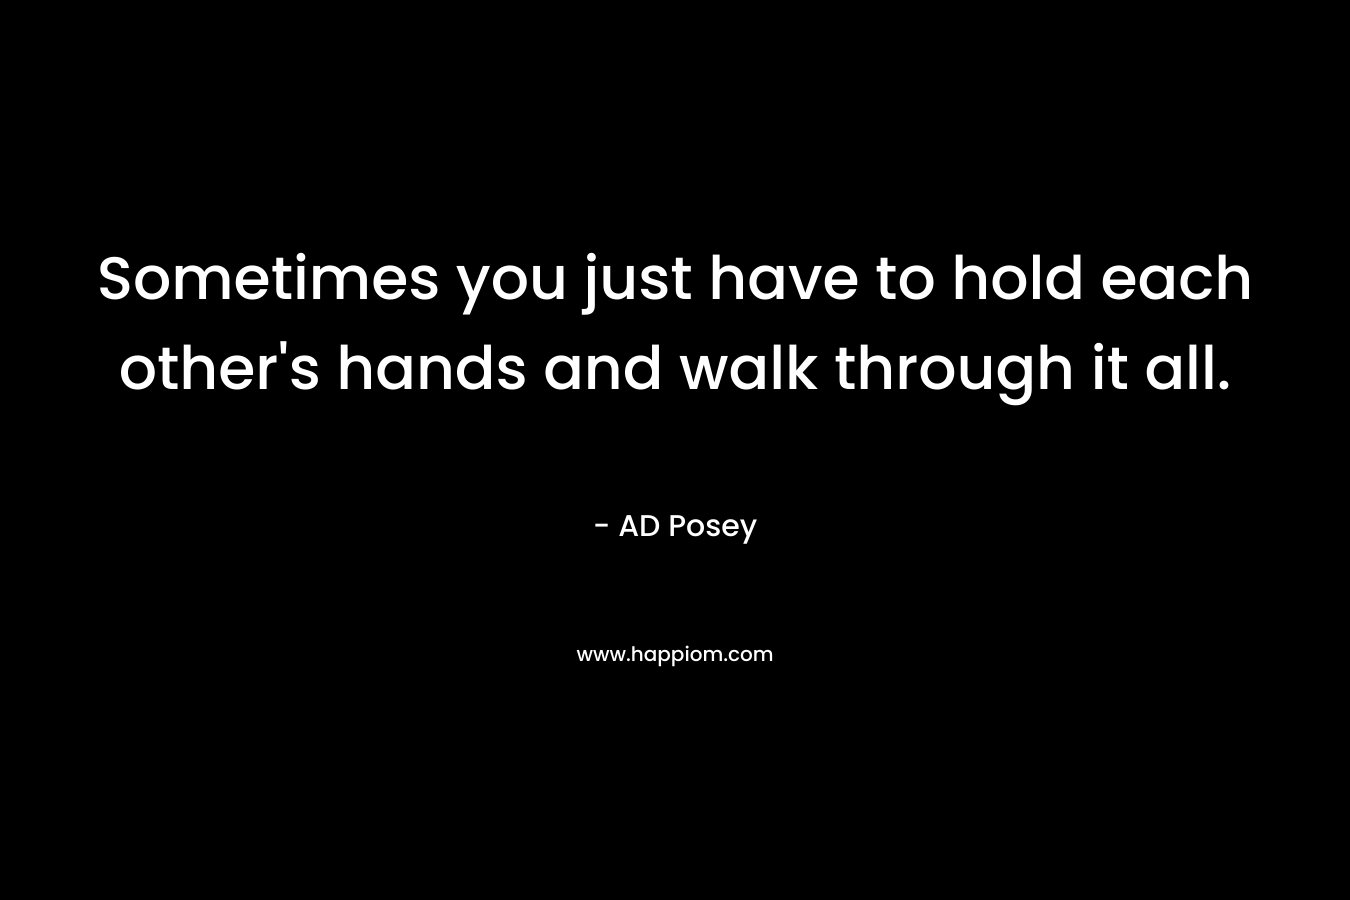 Sometimes you just have to hold each other's hands and walk through it all.